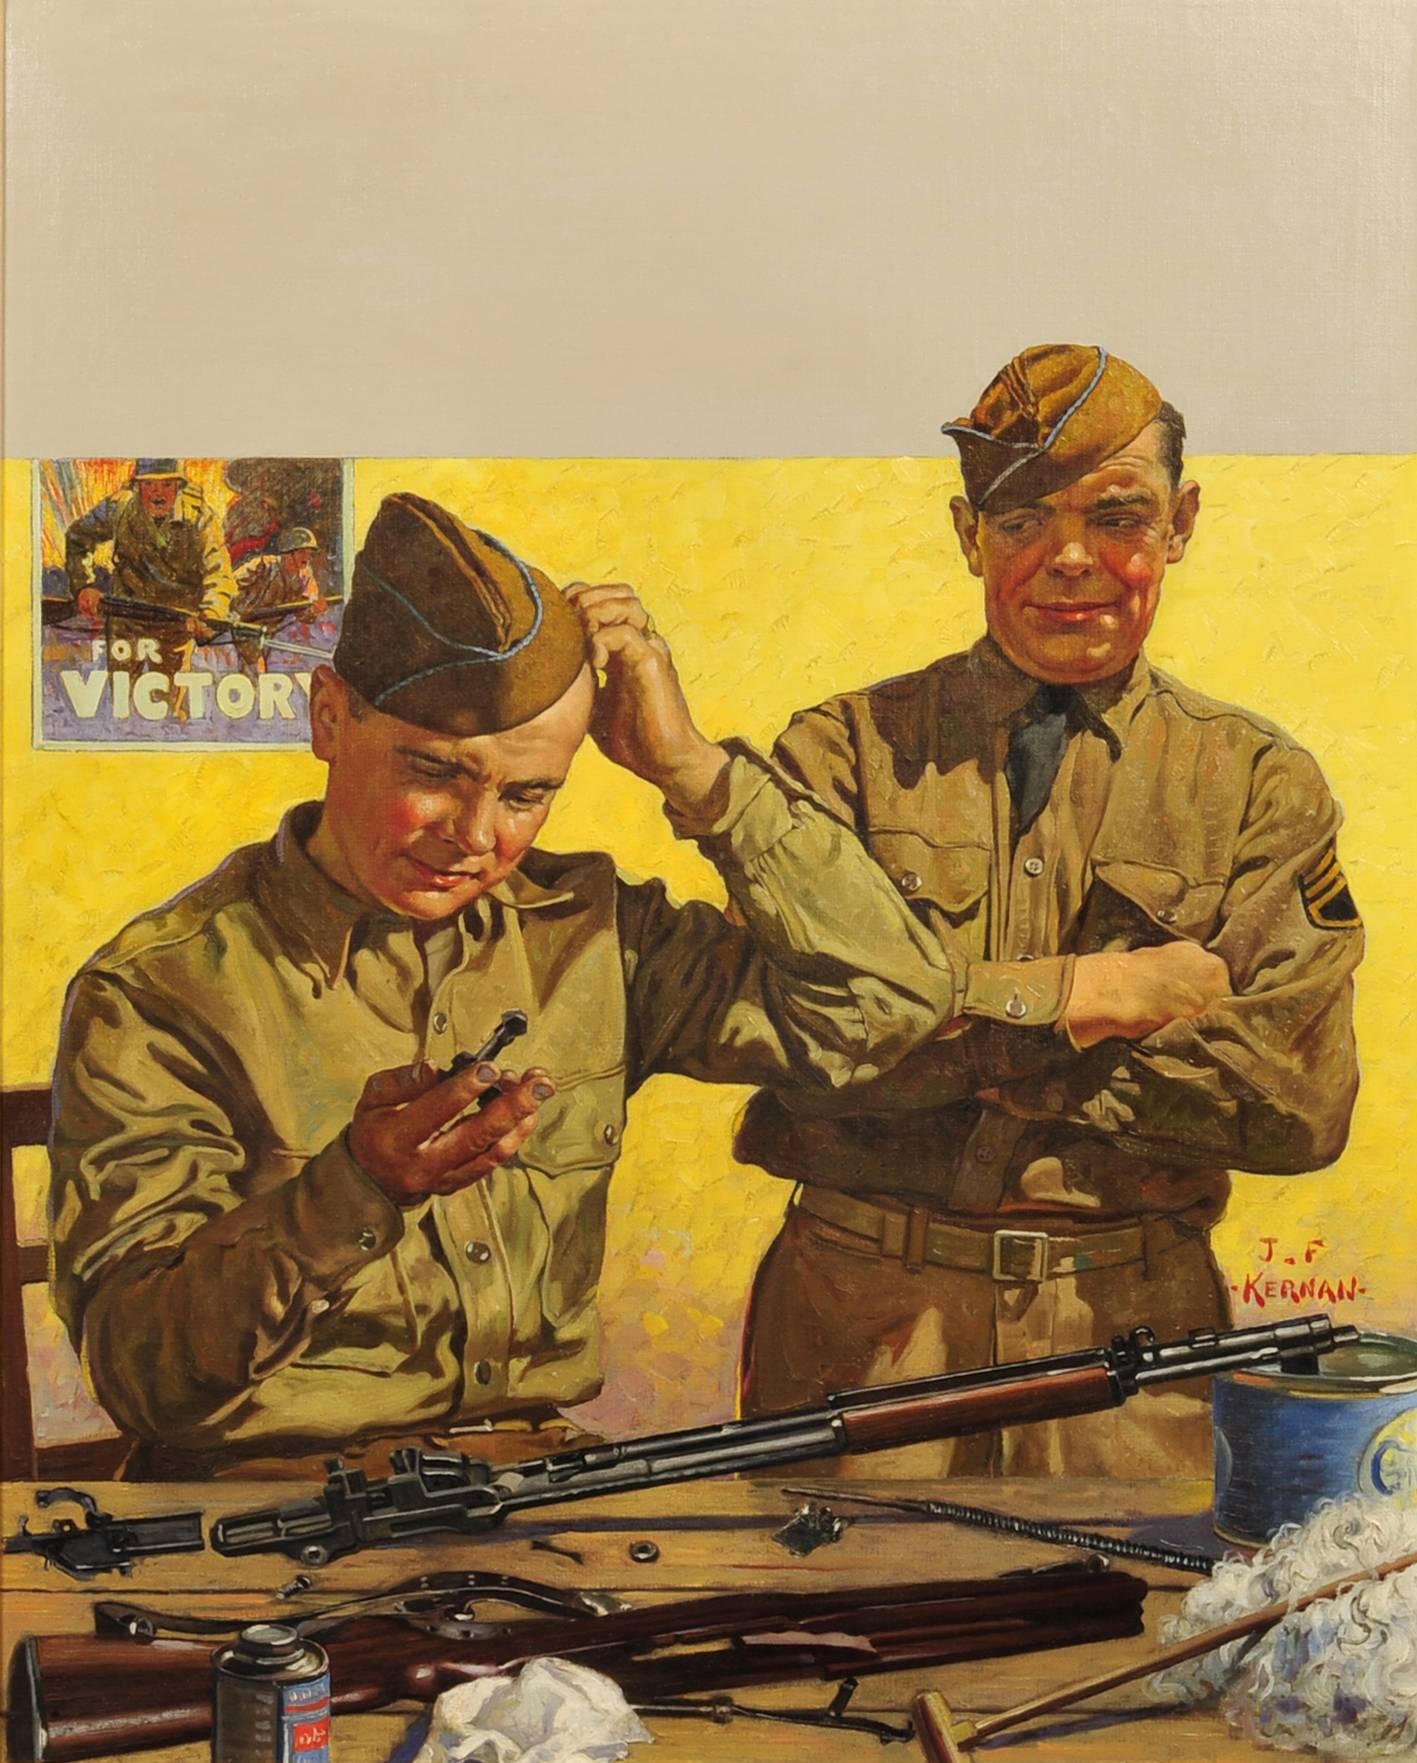 Joseph Francis Kernan Figurative Painting - Soldier Trying to Reassemble, Outdoor Life Magazine Cover